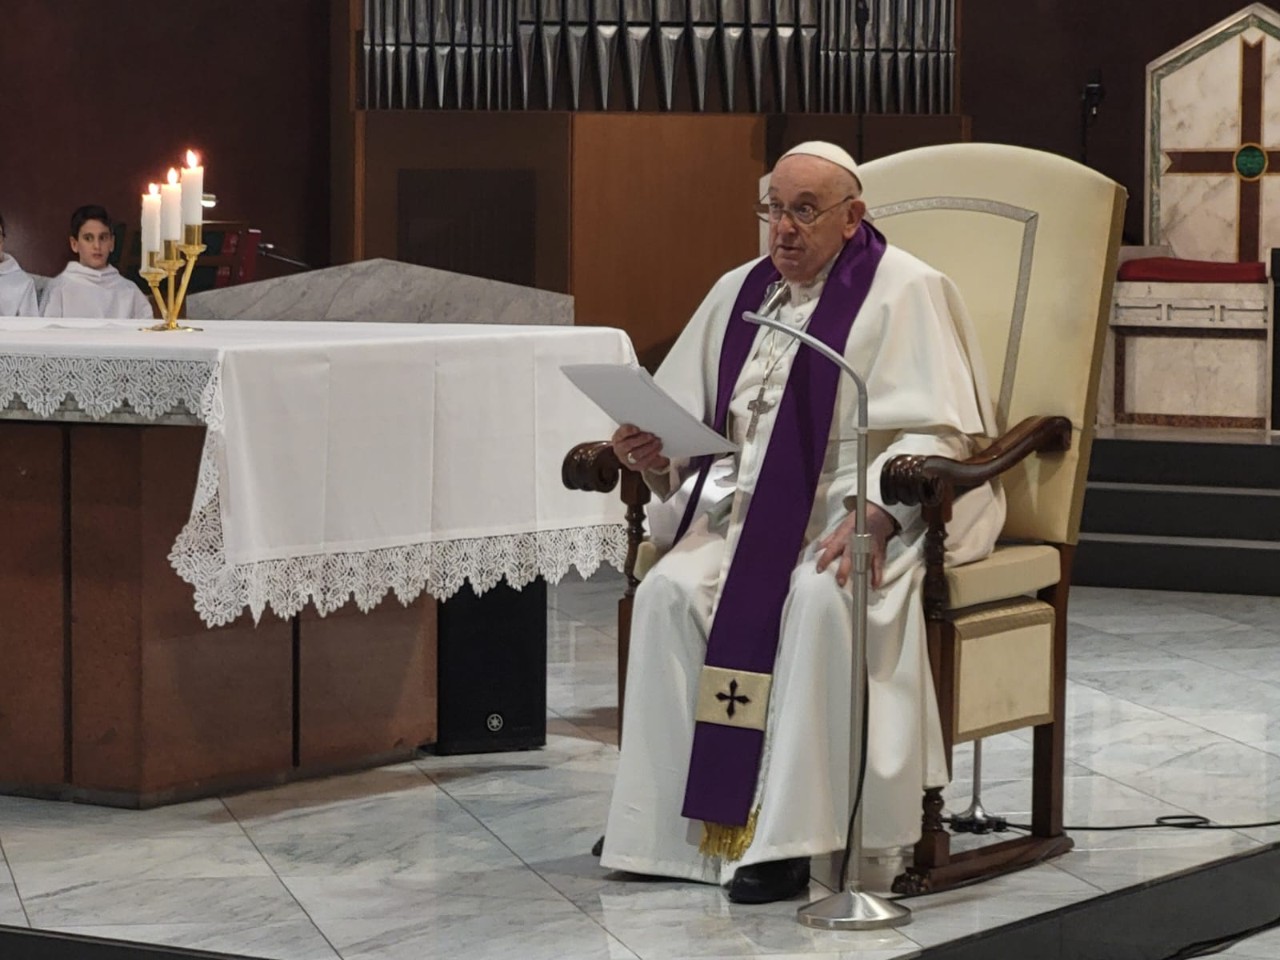 Photo caption: Pope Francis at the 24 Hours for the Lord liturgy